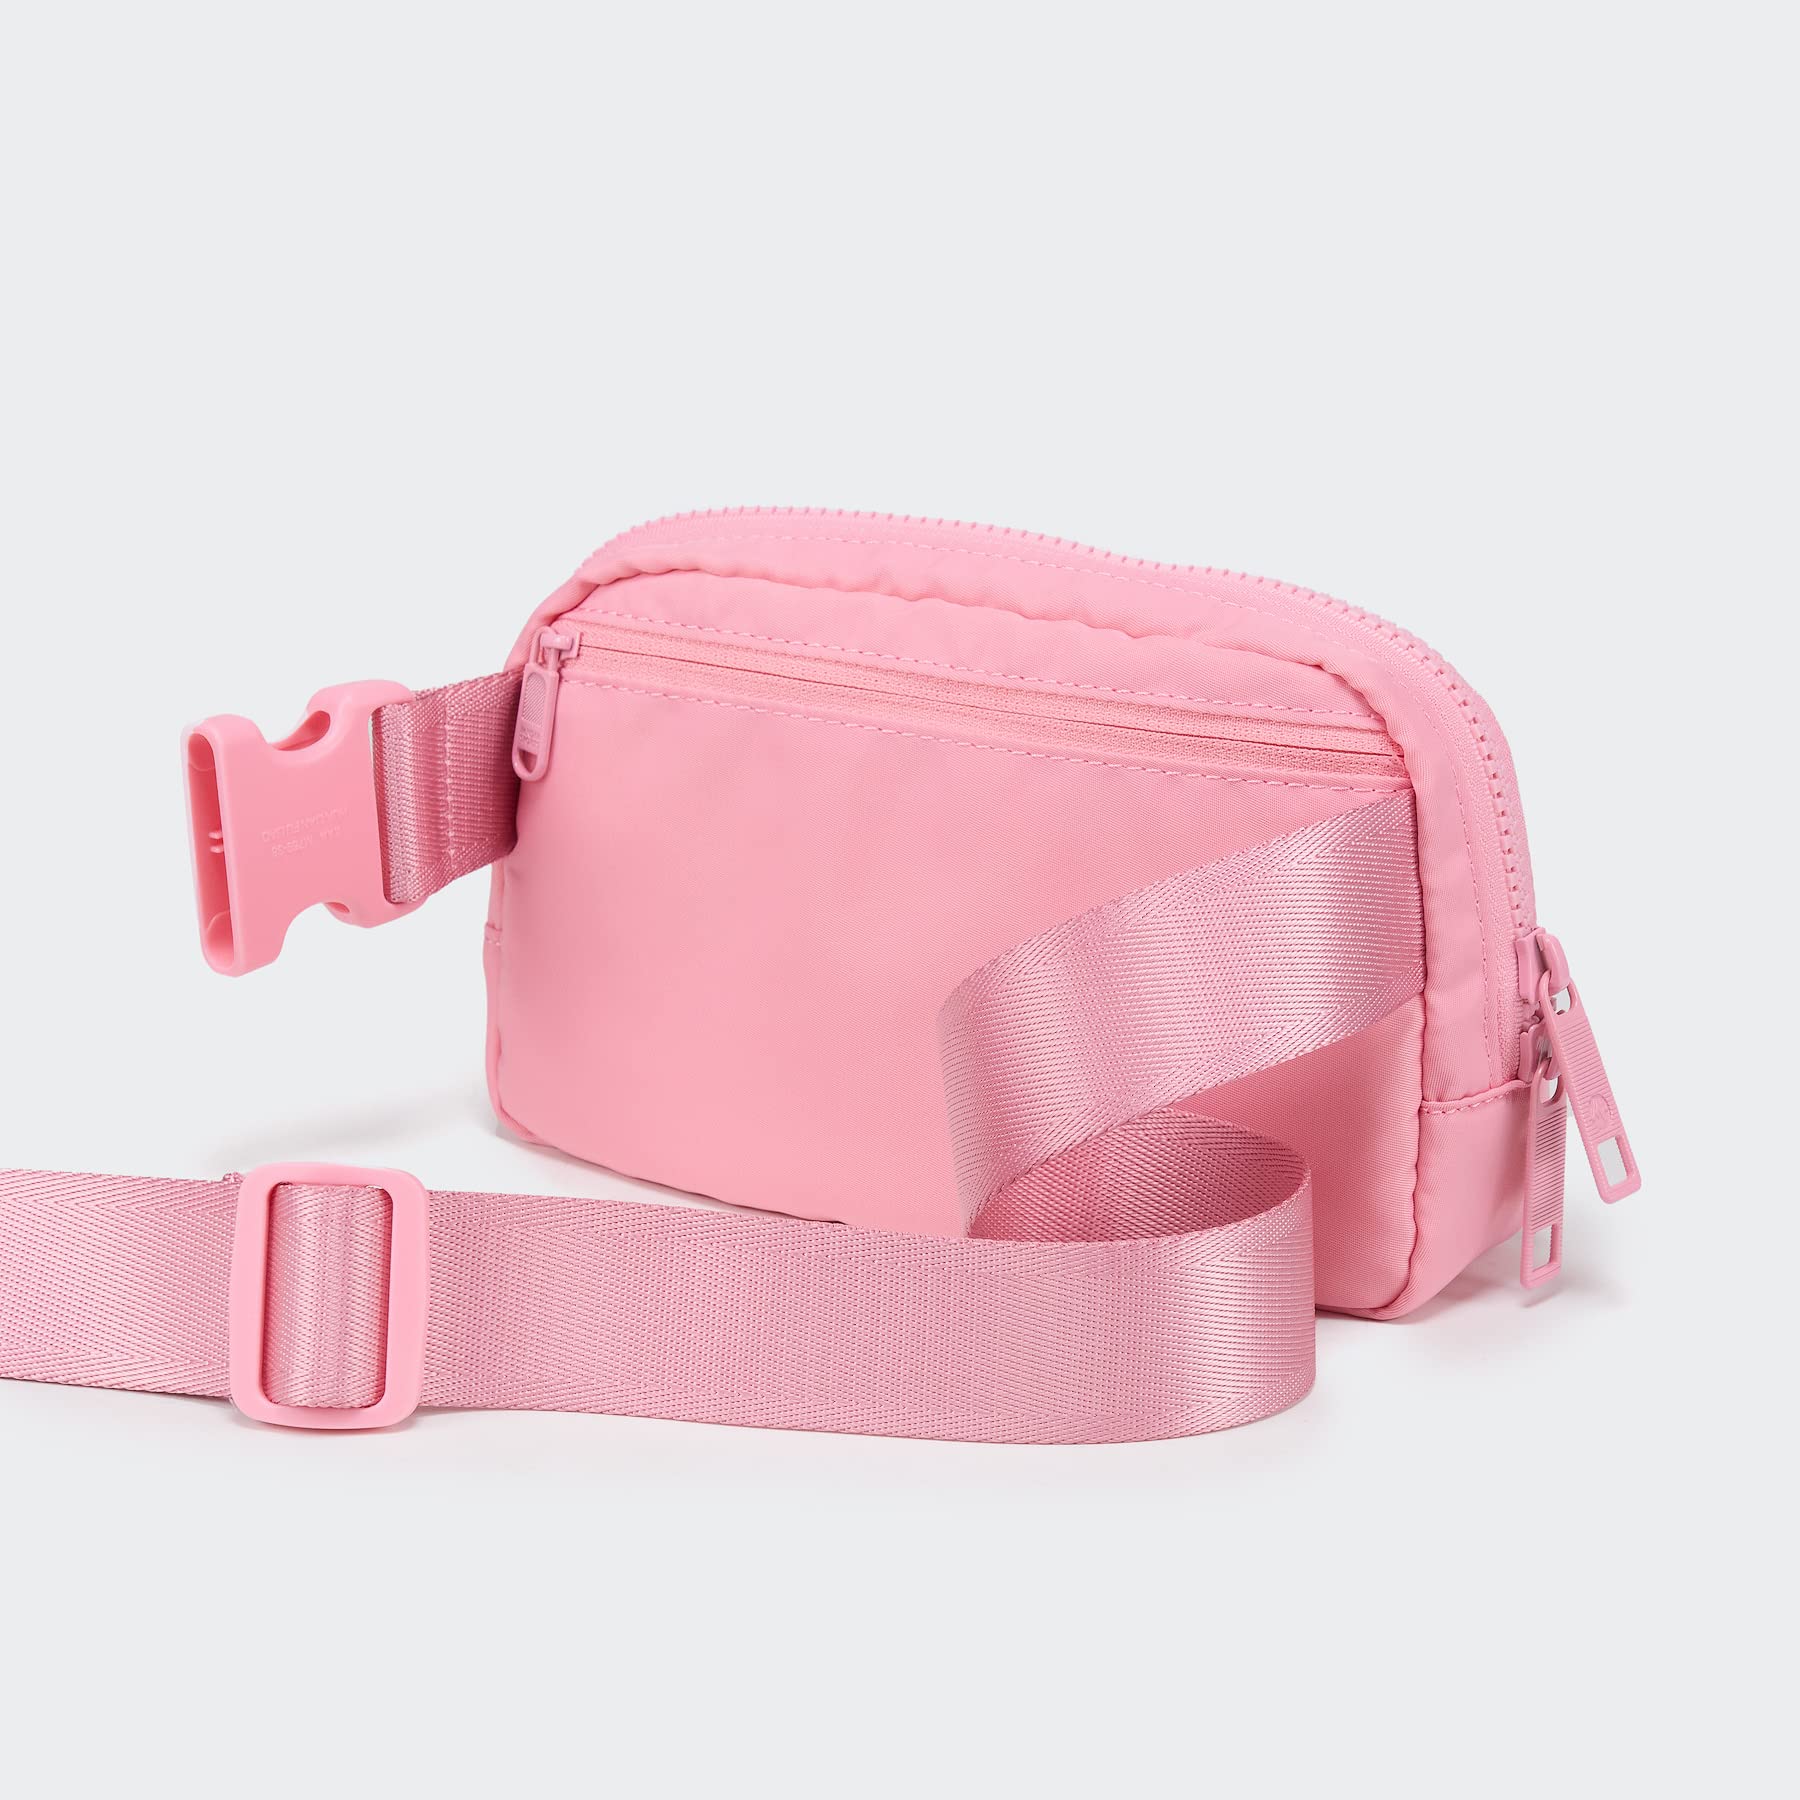 Pander Cross Body Fanny Pack for Women, Fashion Waist Packs, Crossbody Bags, Belt Bag with Adjustable Strap (Crystal Rose, US).